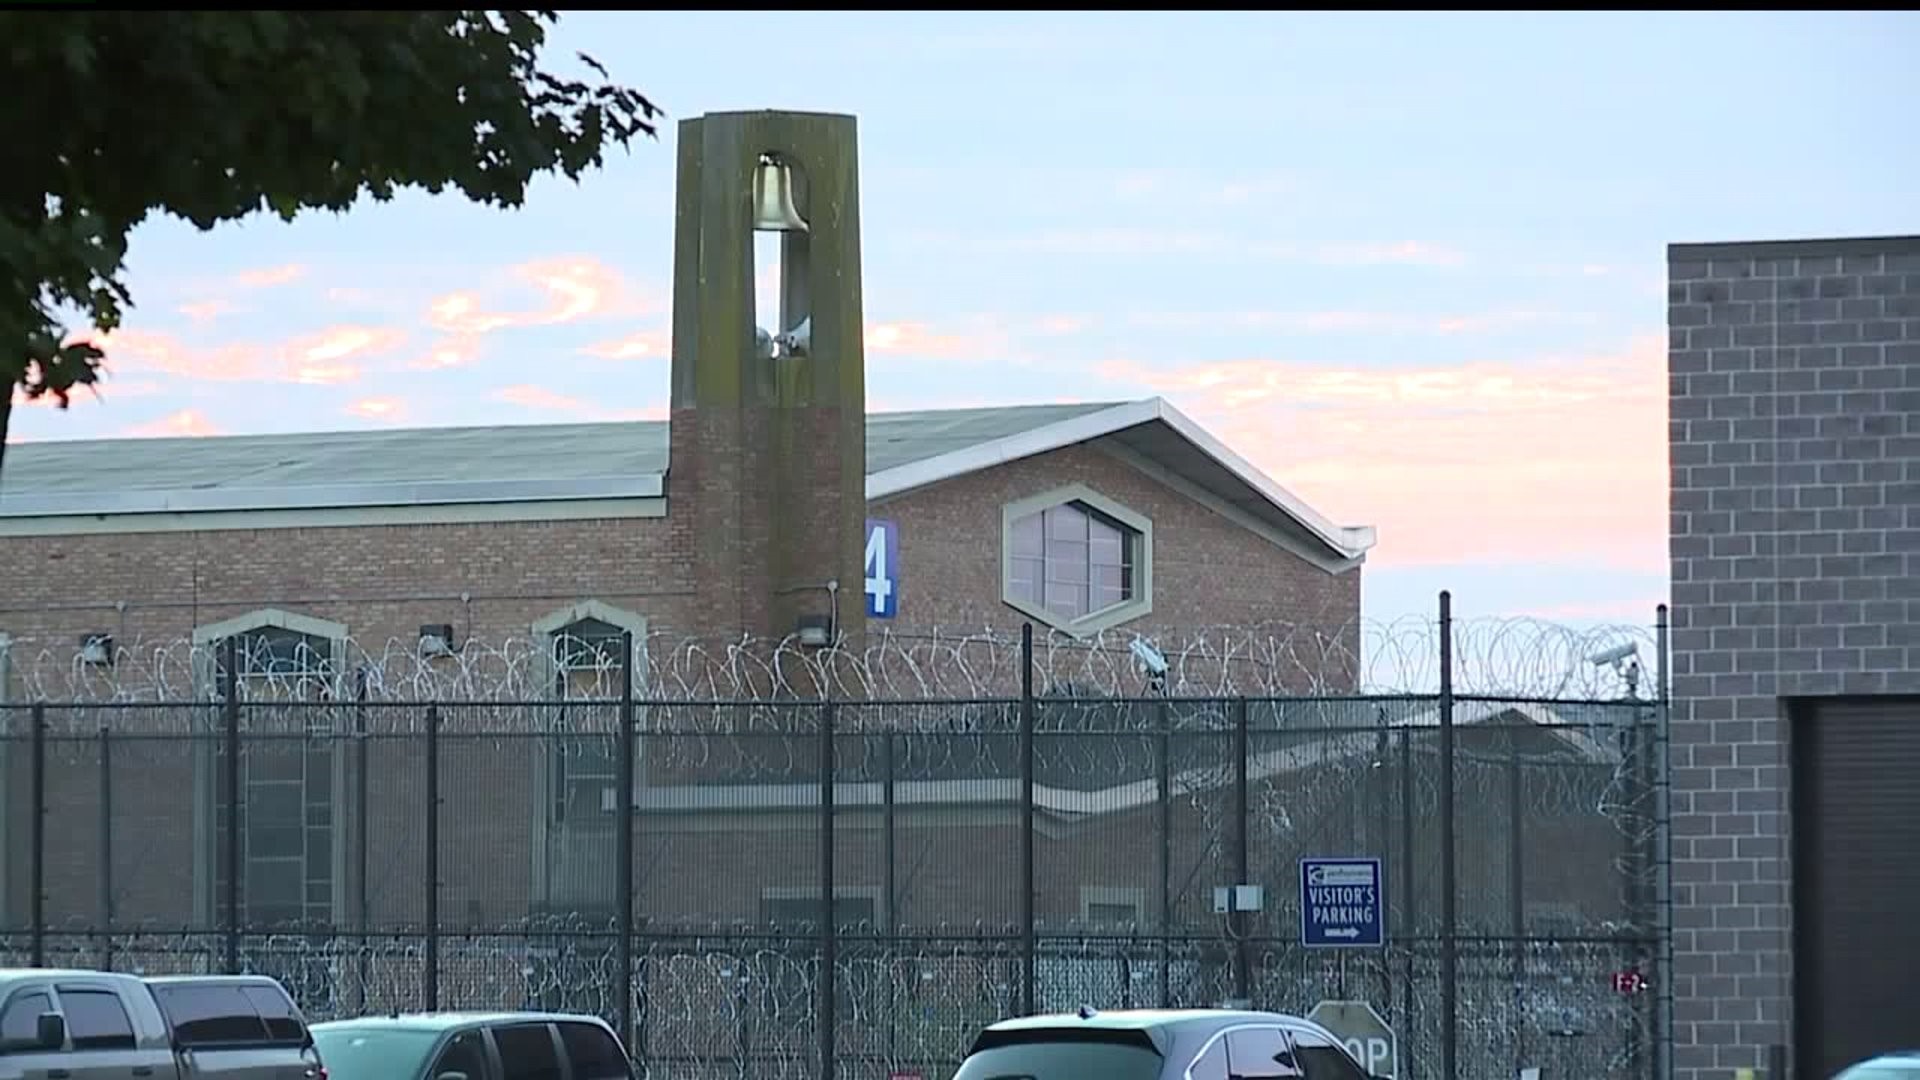 State correctional institutions throughout Pa. on lockdown